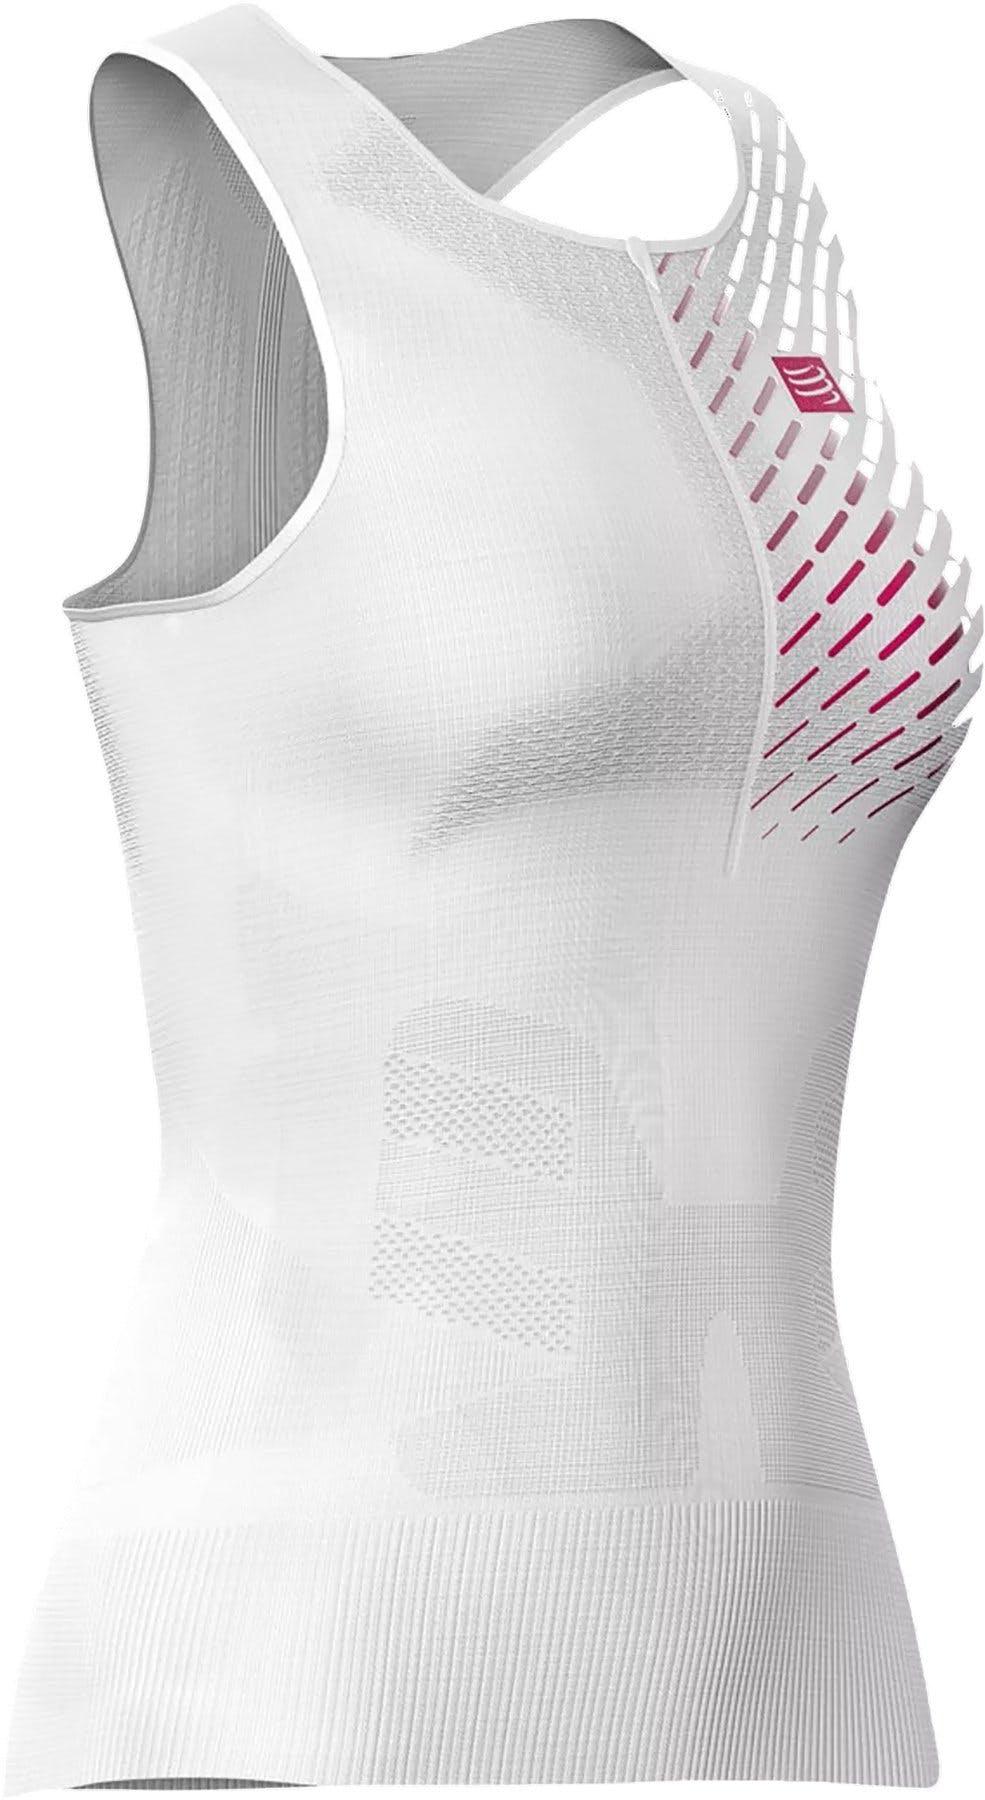 Product image for Trail Running Postural Tank Top - Women's